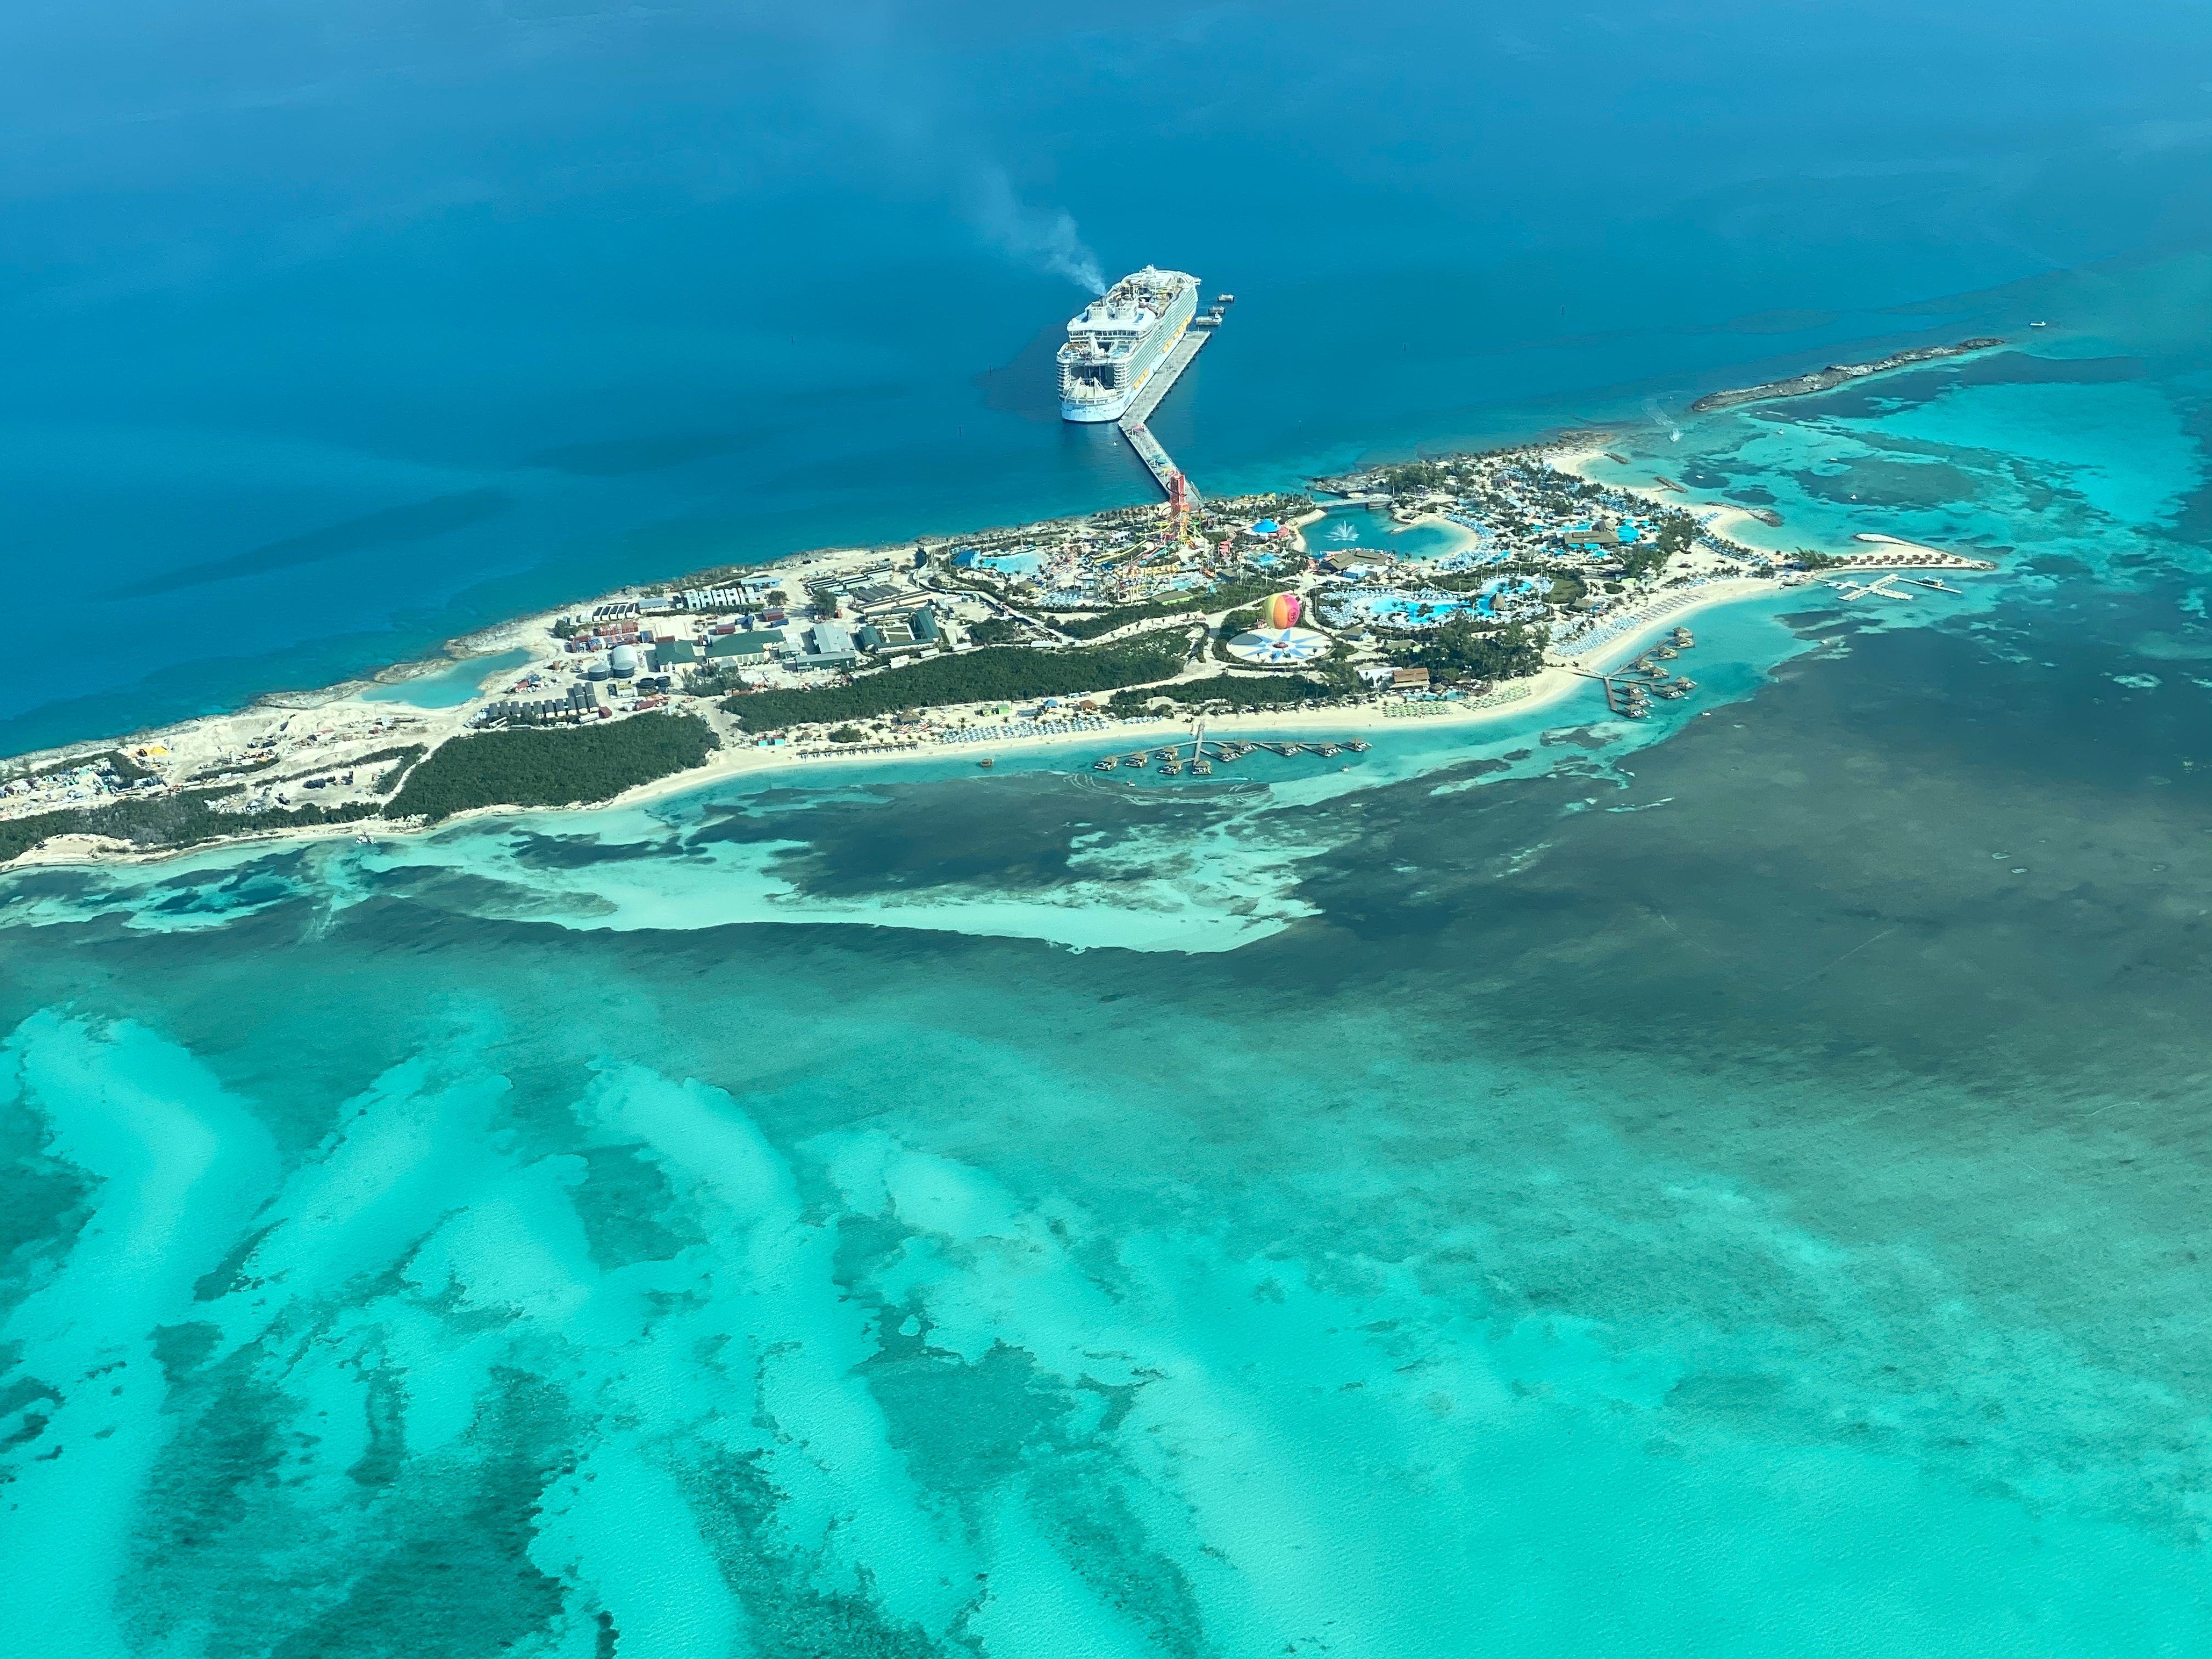 CocoCay island in the Bahamas with a cruise ship docked